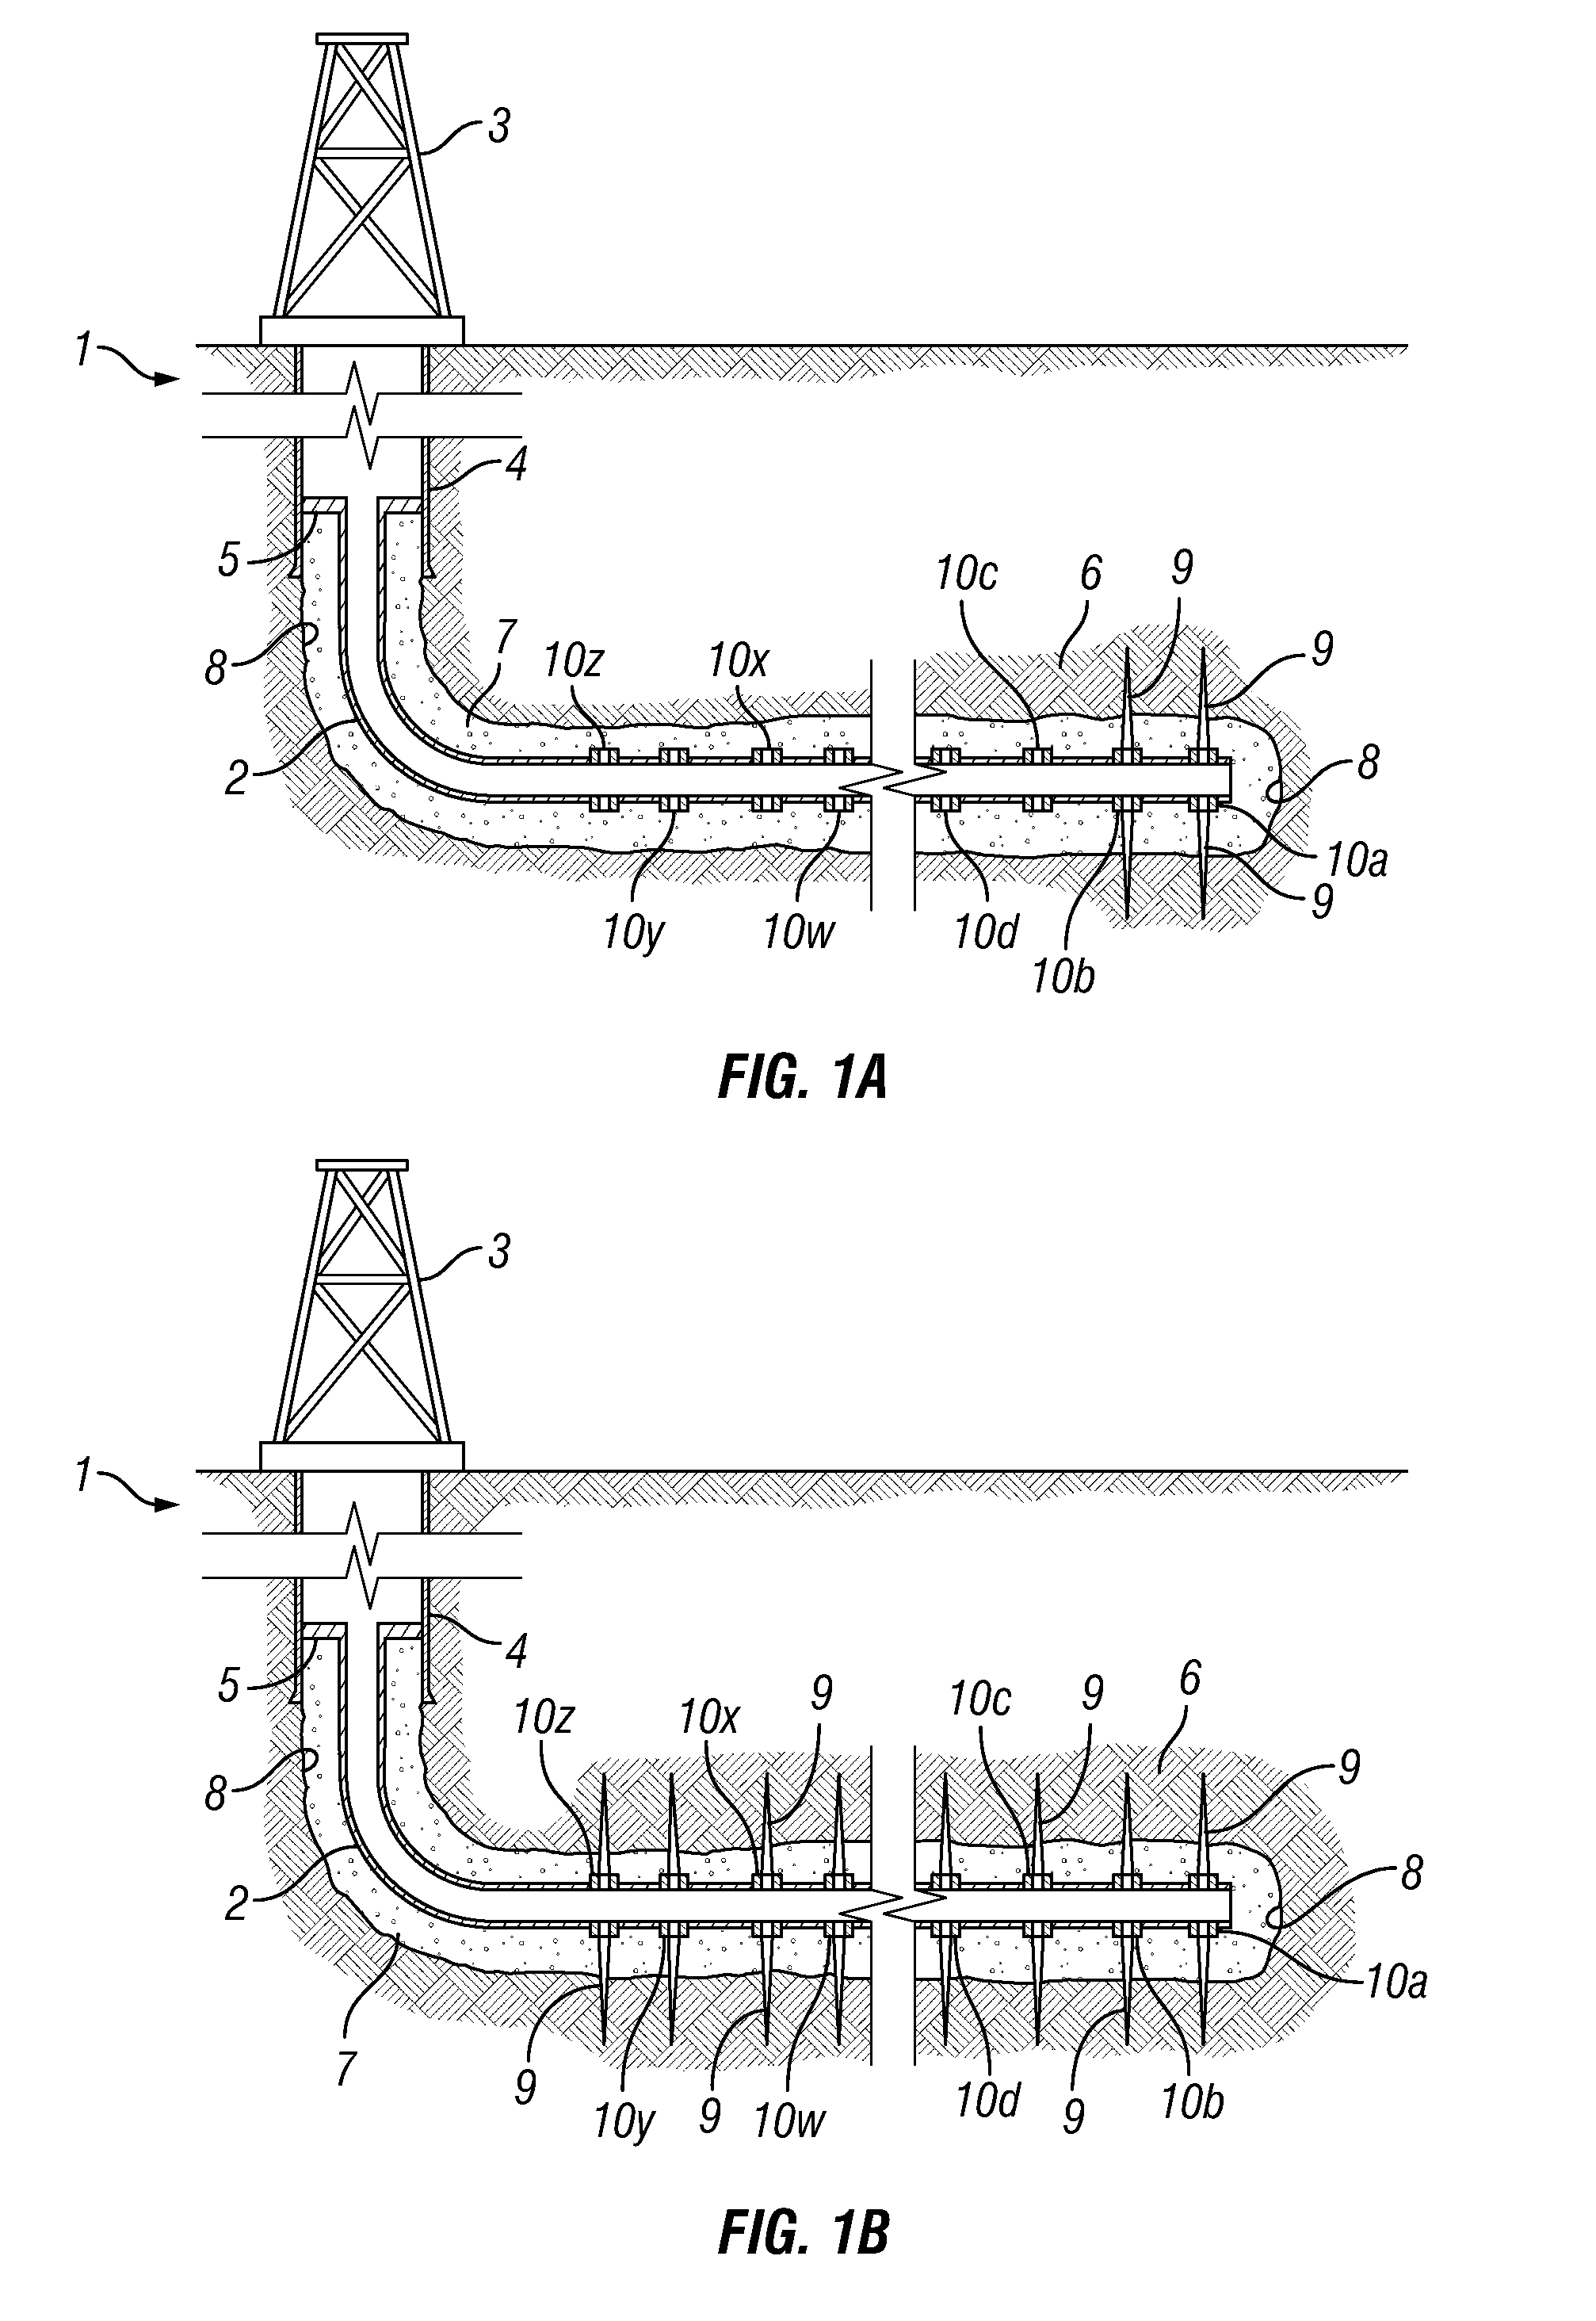 Linearly indexing well bore tool